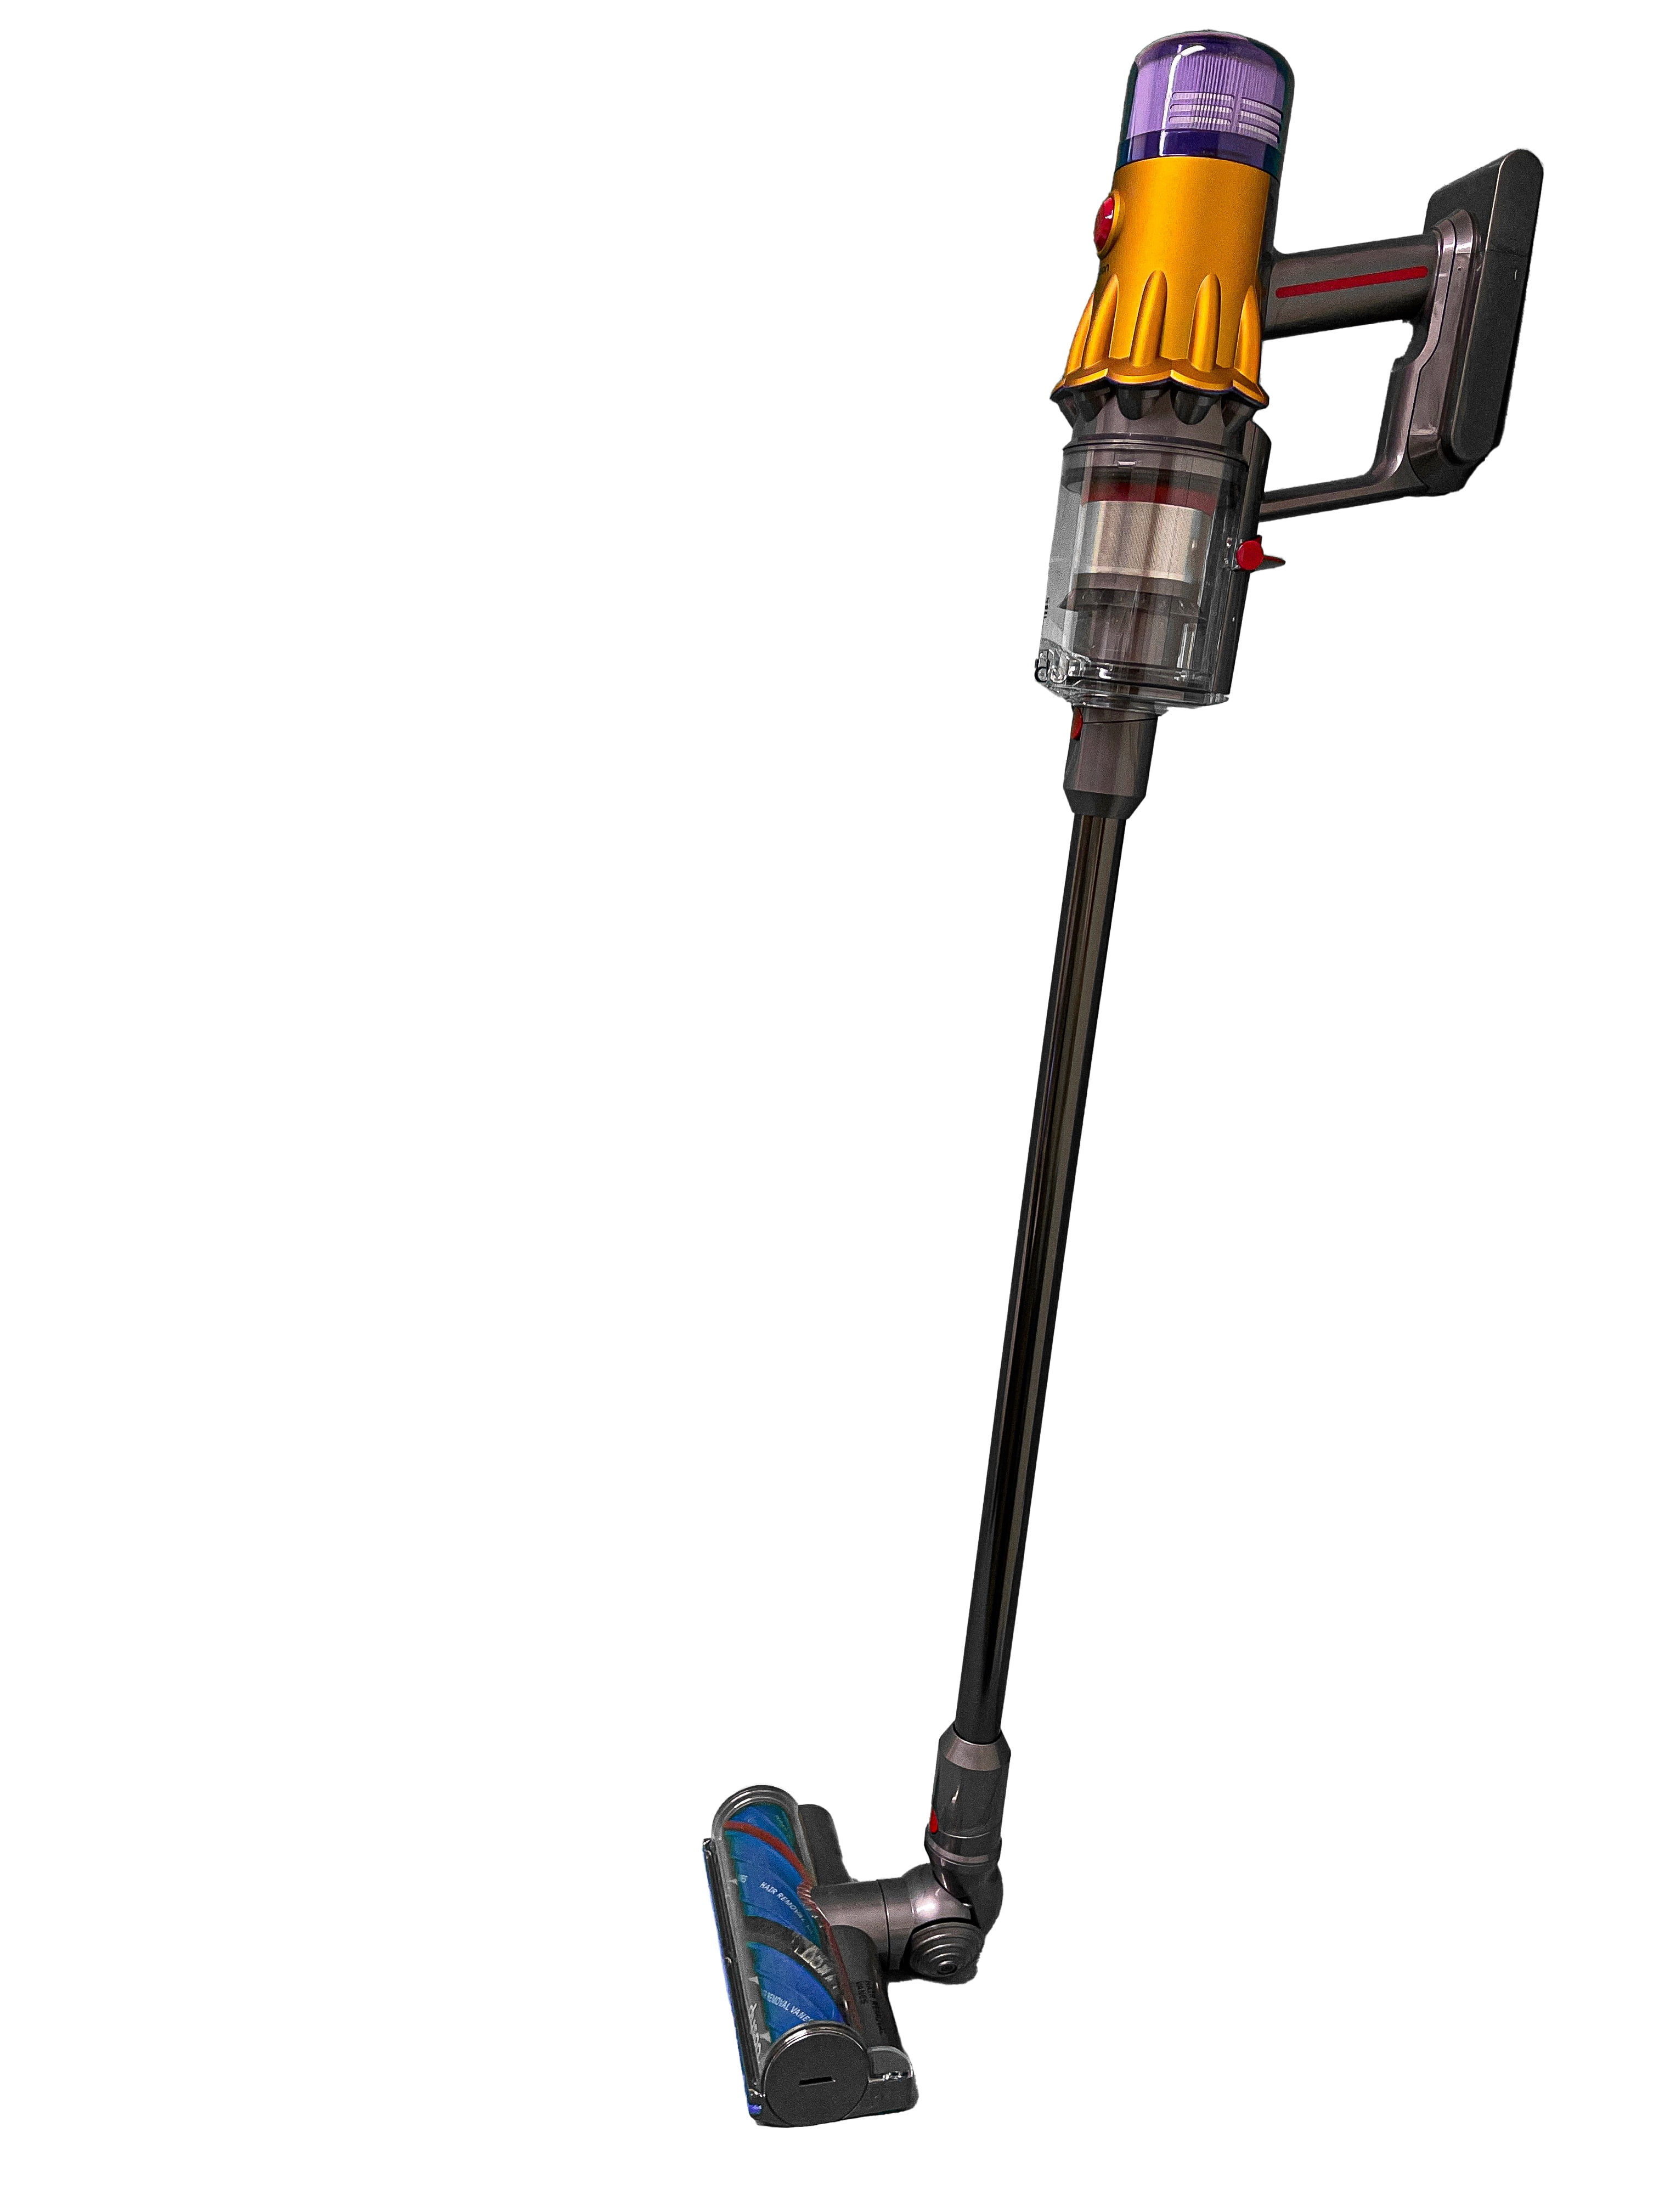 Dyson V12 Detect Slim Cordless Vacuum with 8 accessories Yellow/Iron  405863-01/447625-01 - Best Buy